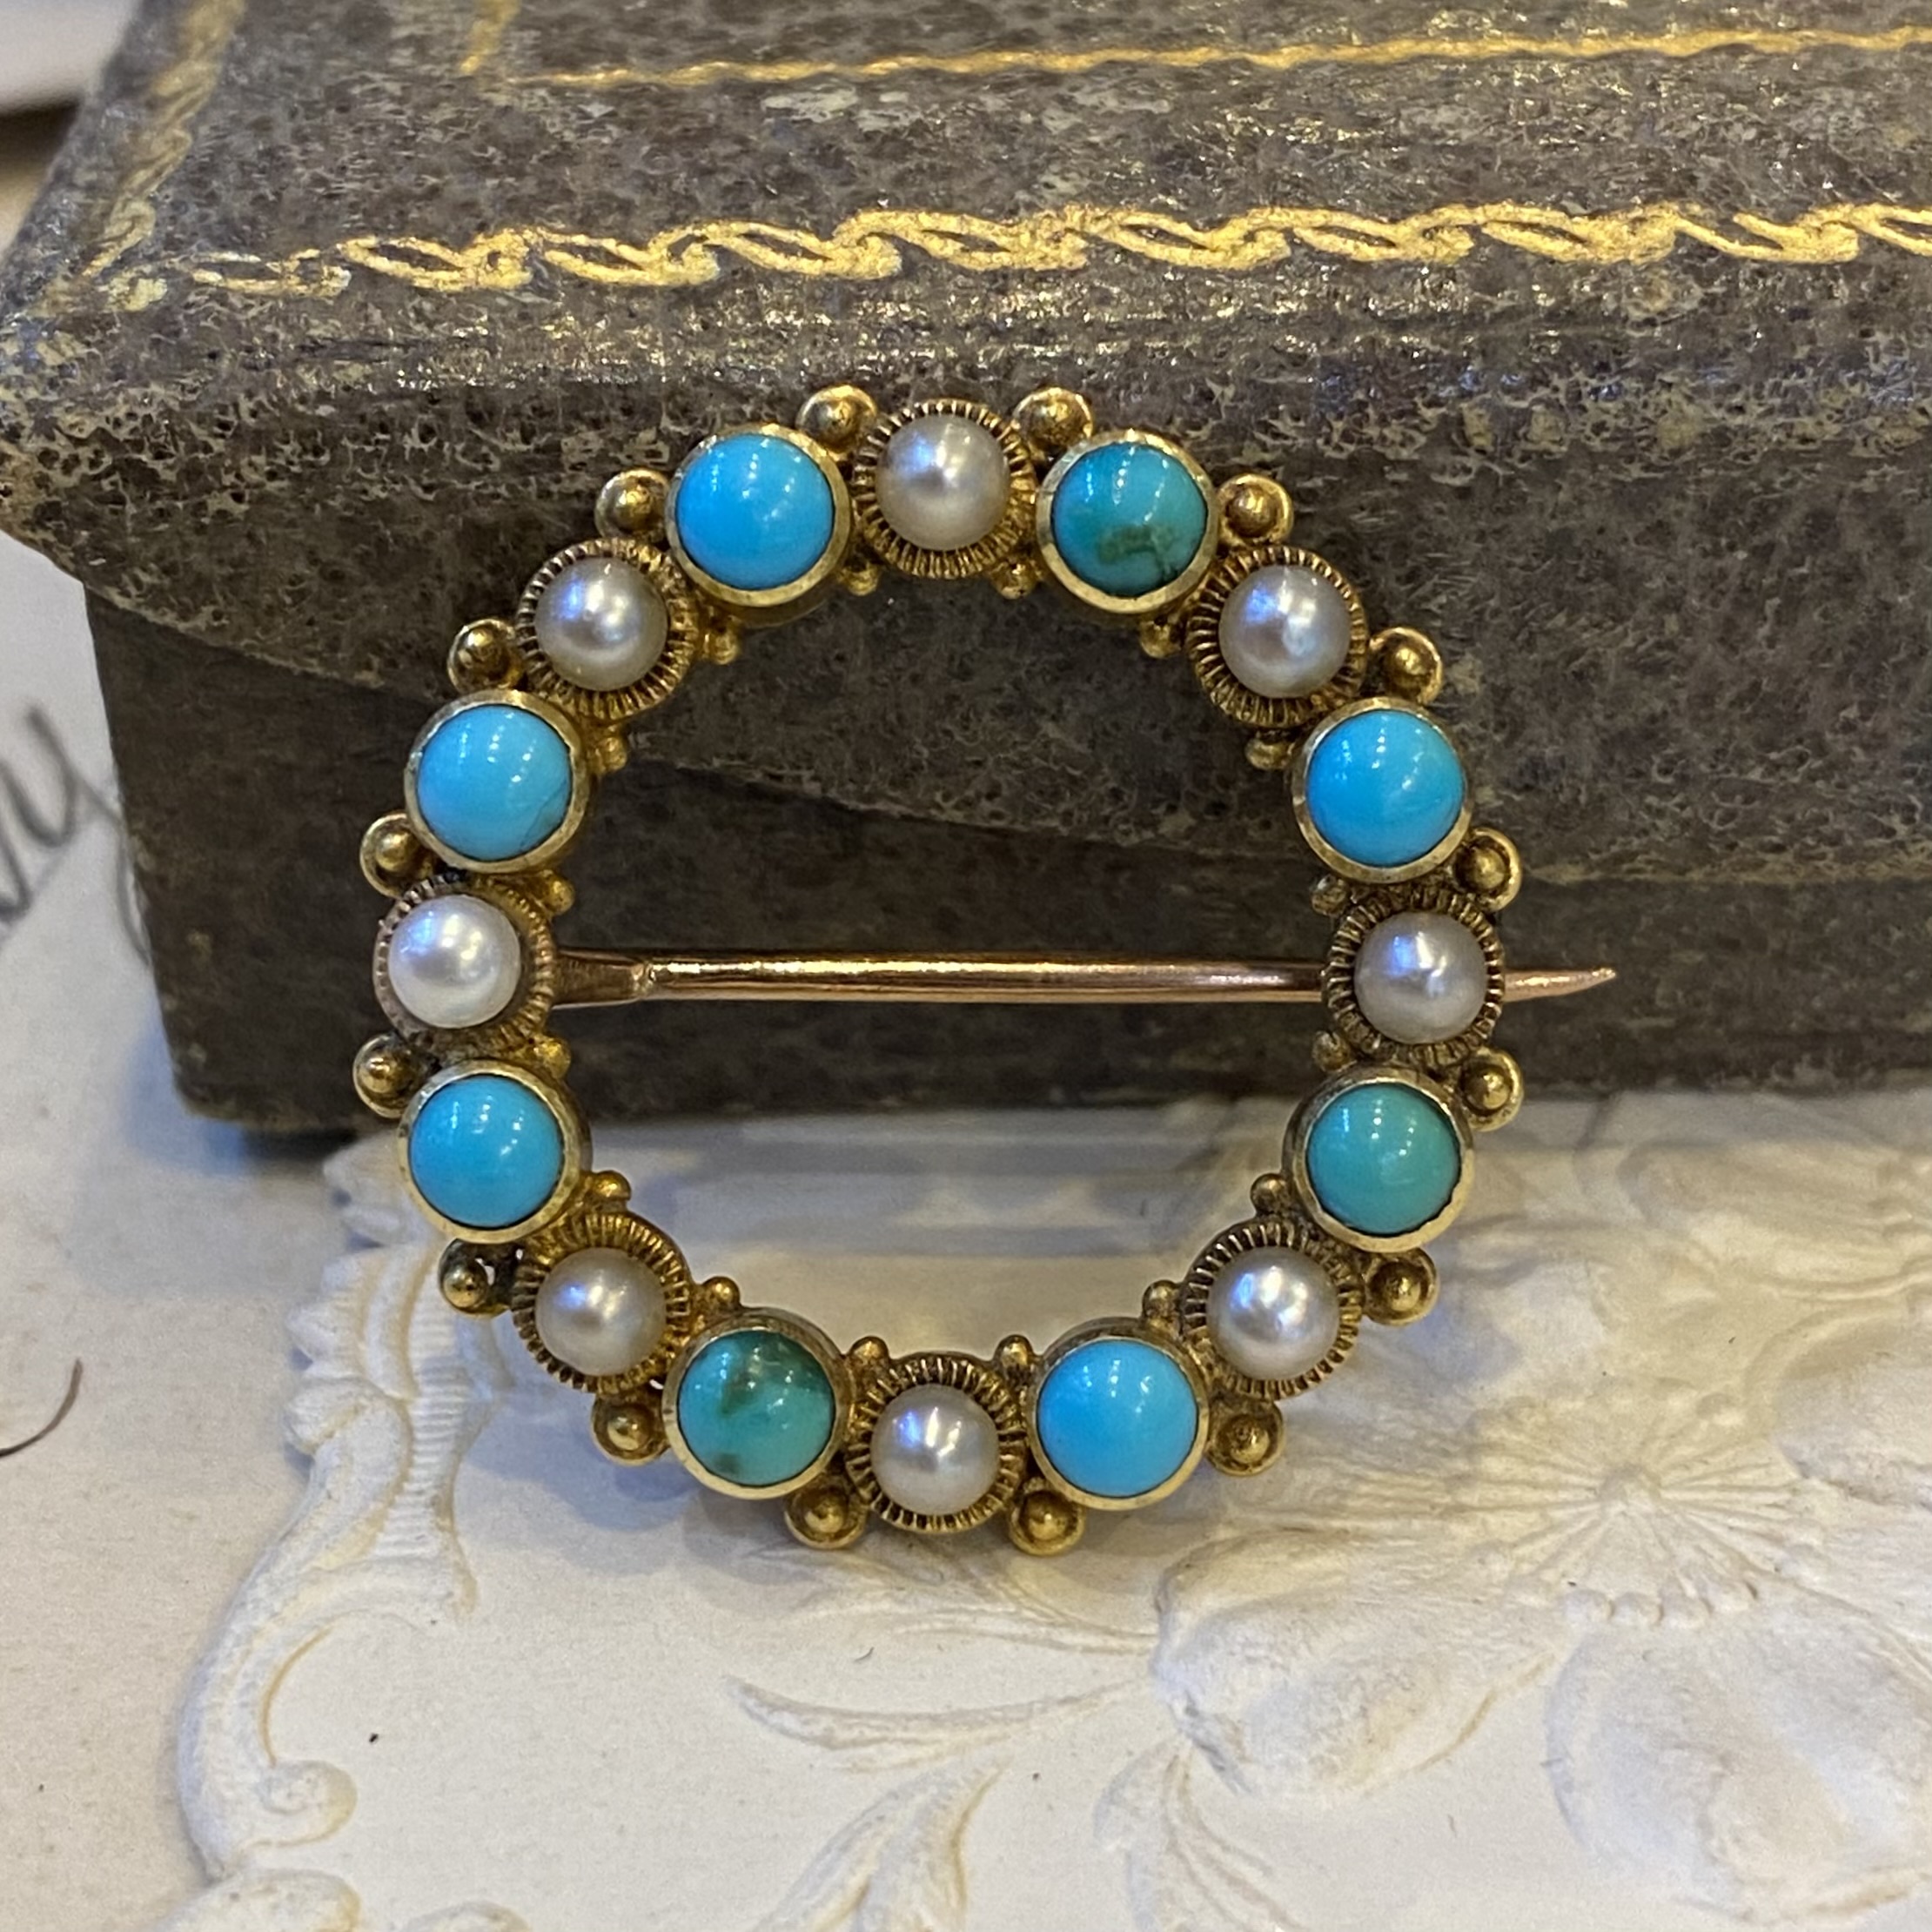 14K Yellow Gold Victorian Brooch/Pin with Turquoise and Seed Pearls -  Colonial Trading Company